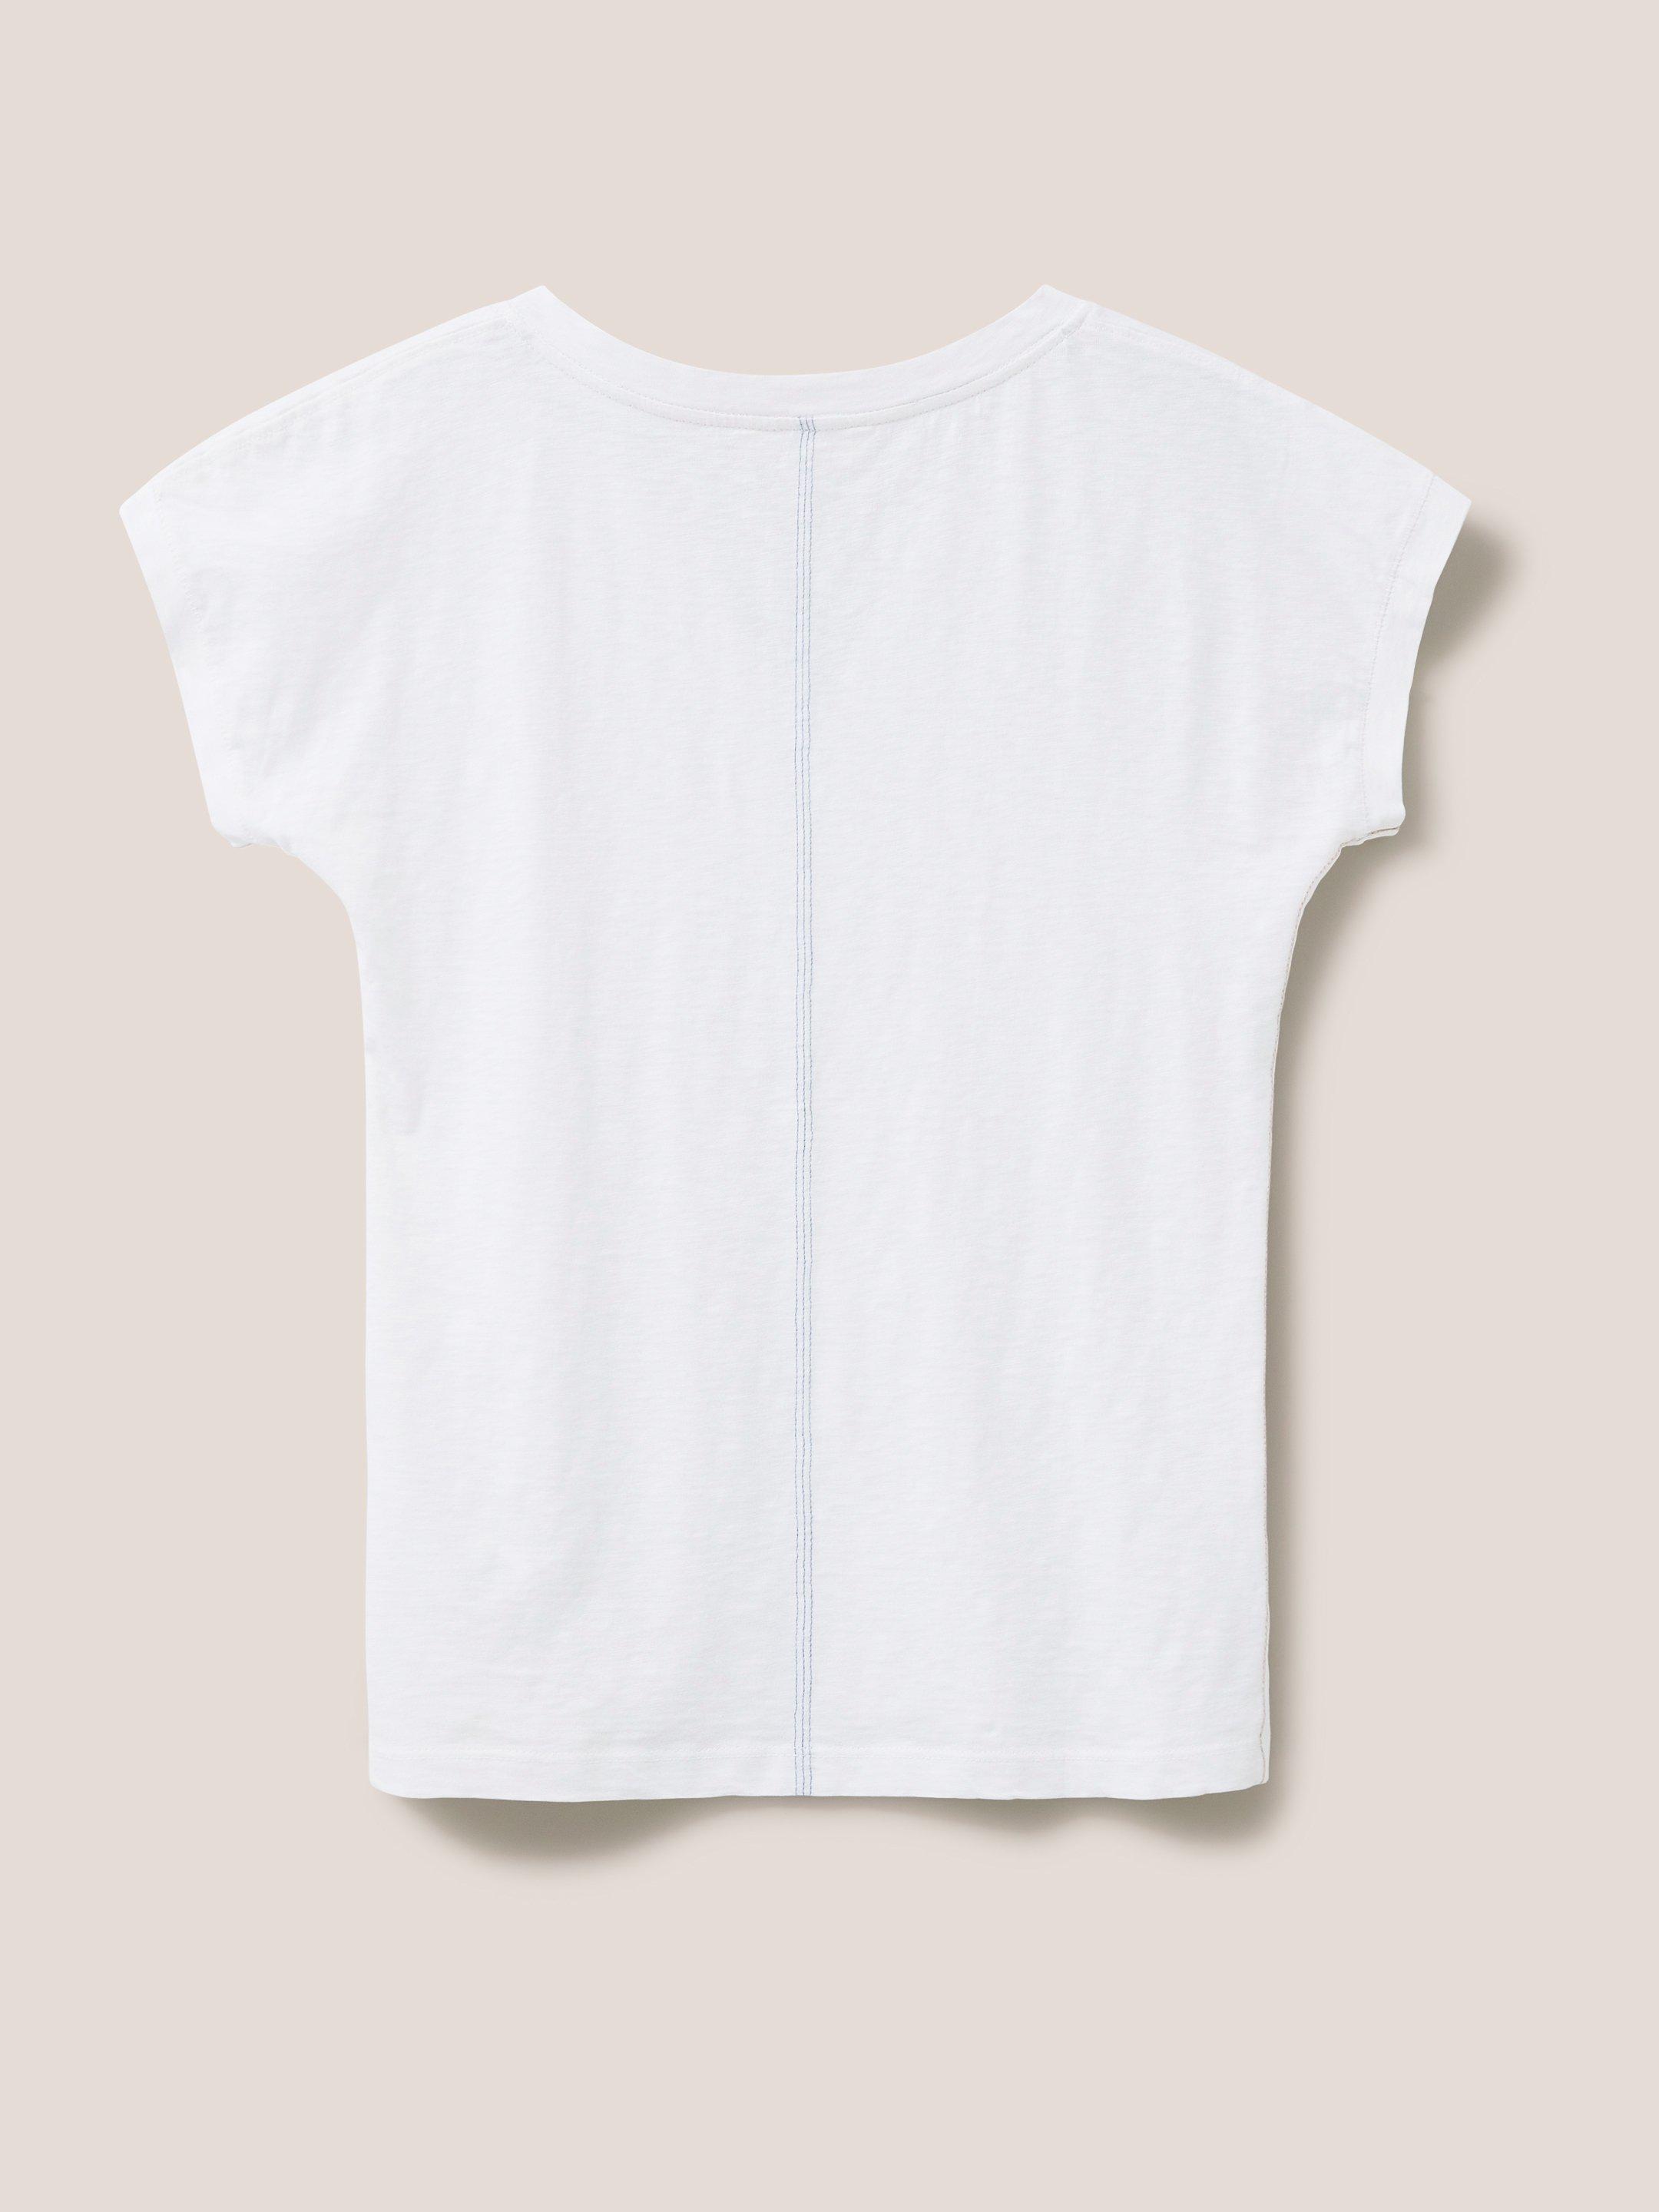 Nelly Notch Tee in BRIL WHITE - FLAT BACK